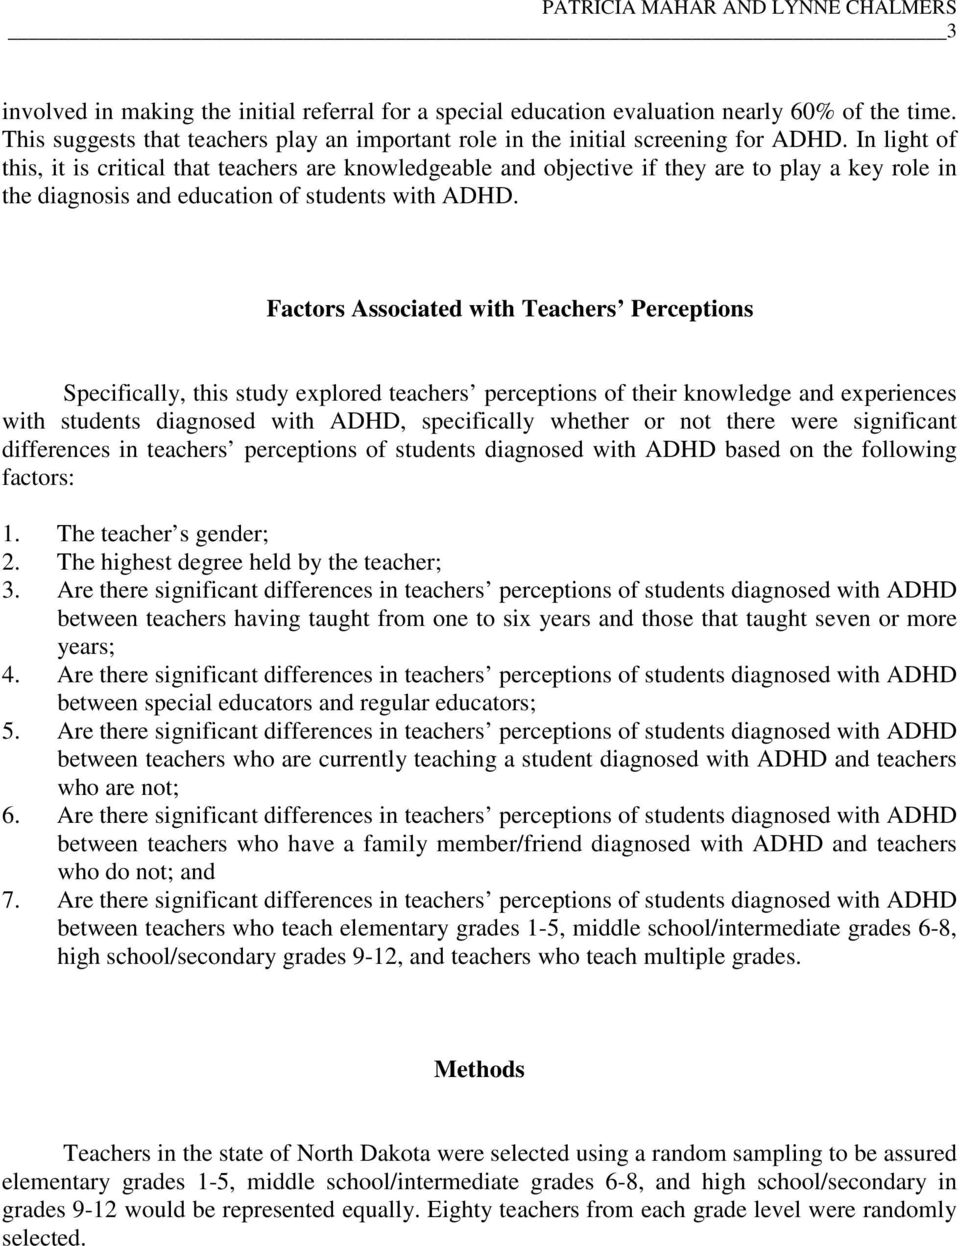 In light of this, it is critical that teachers are knowledgeable and objective if they are to play a key role in the diagnosis and education of students with ADHD.